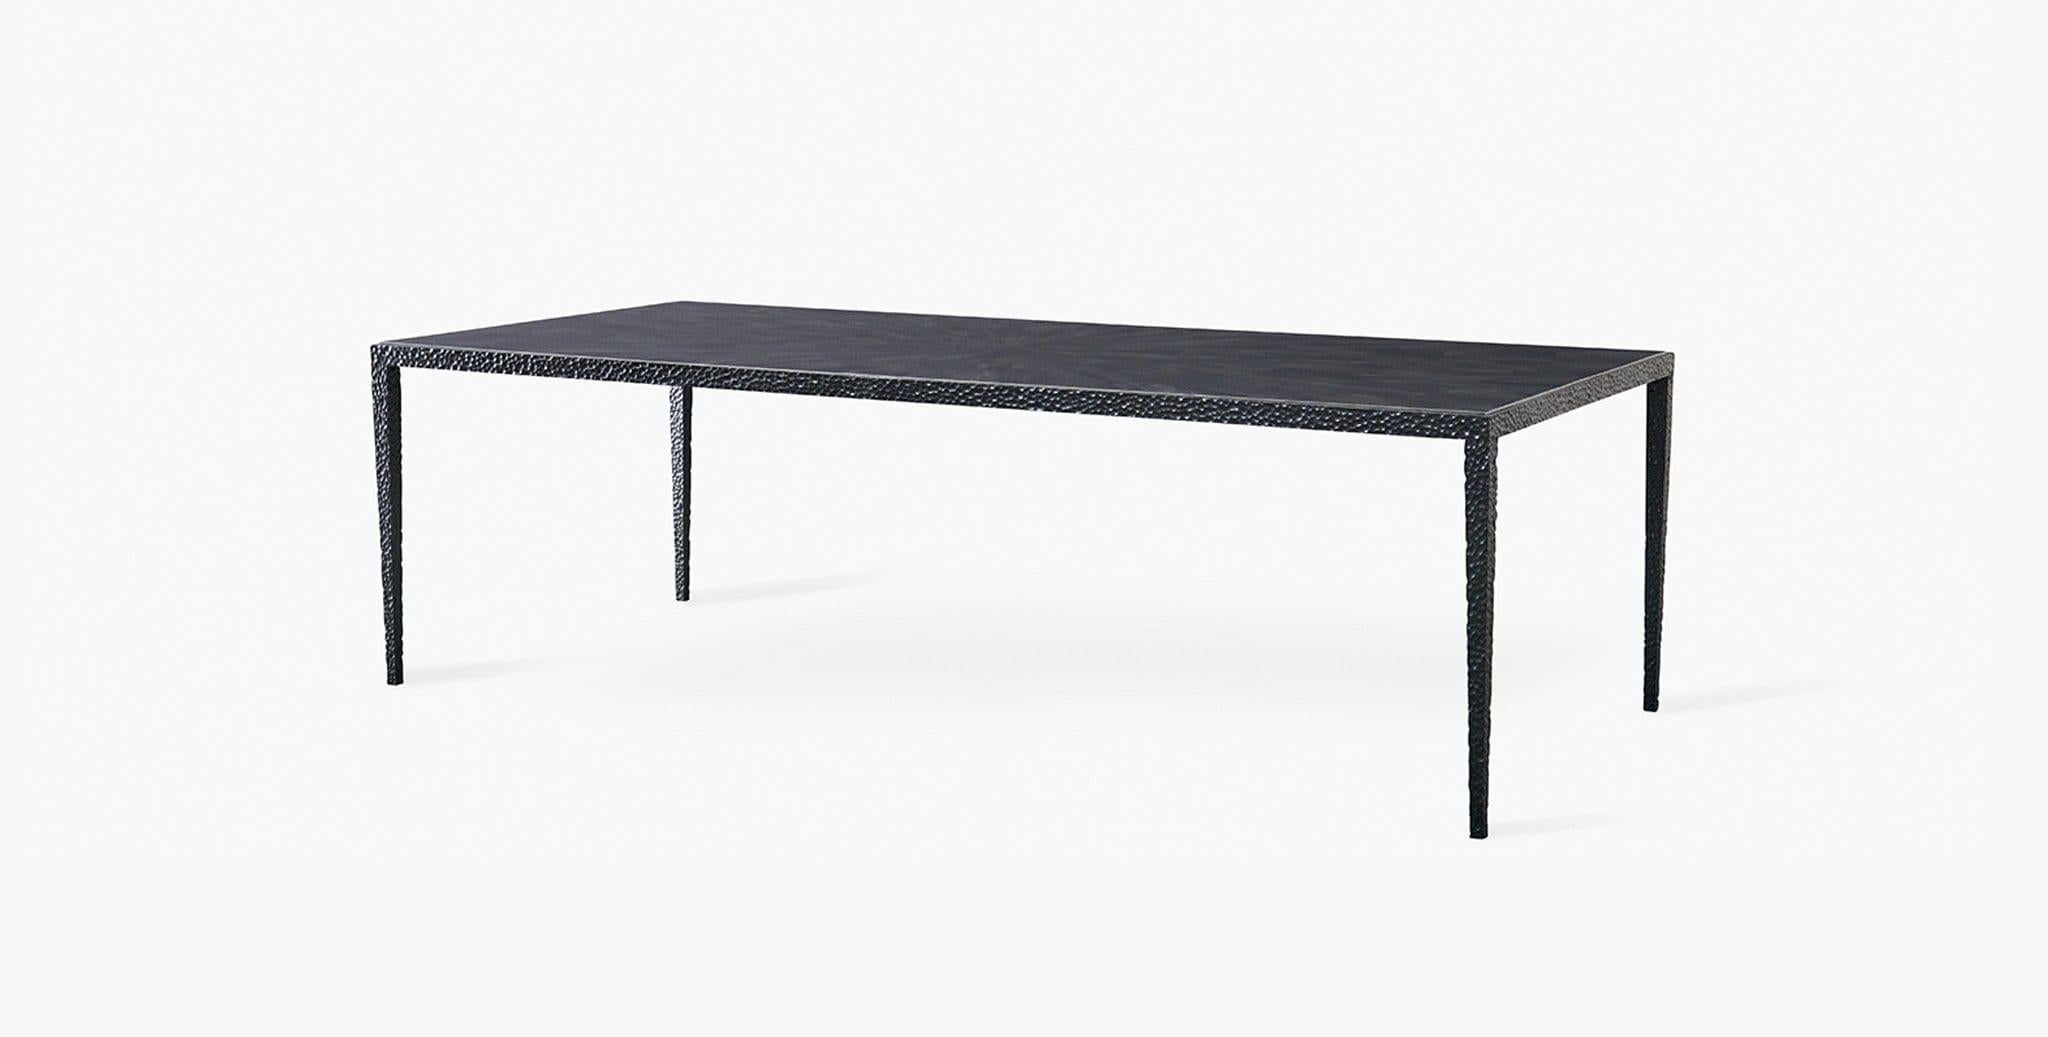 Our Aster Coffee Table creates a strong statement with its unique faux Horn tabletop and hammered black steel legs. Our handcrafted finishes are inspired by variations within natural textures. Each selection is slightly unique.

Faux Horn tabletop